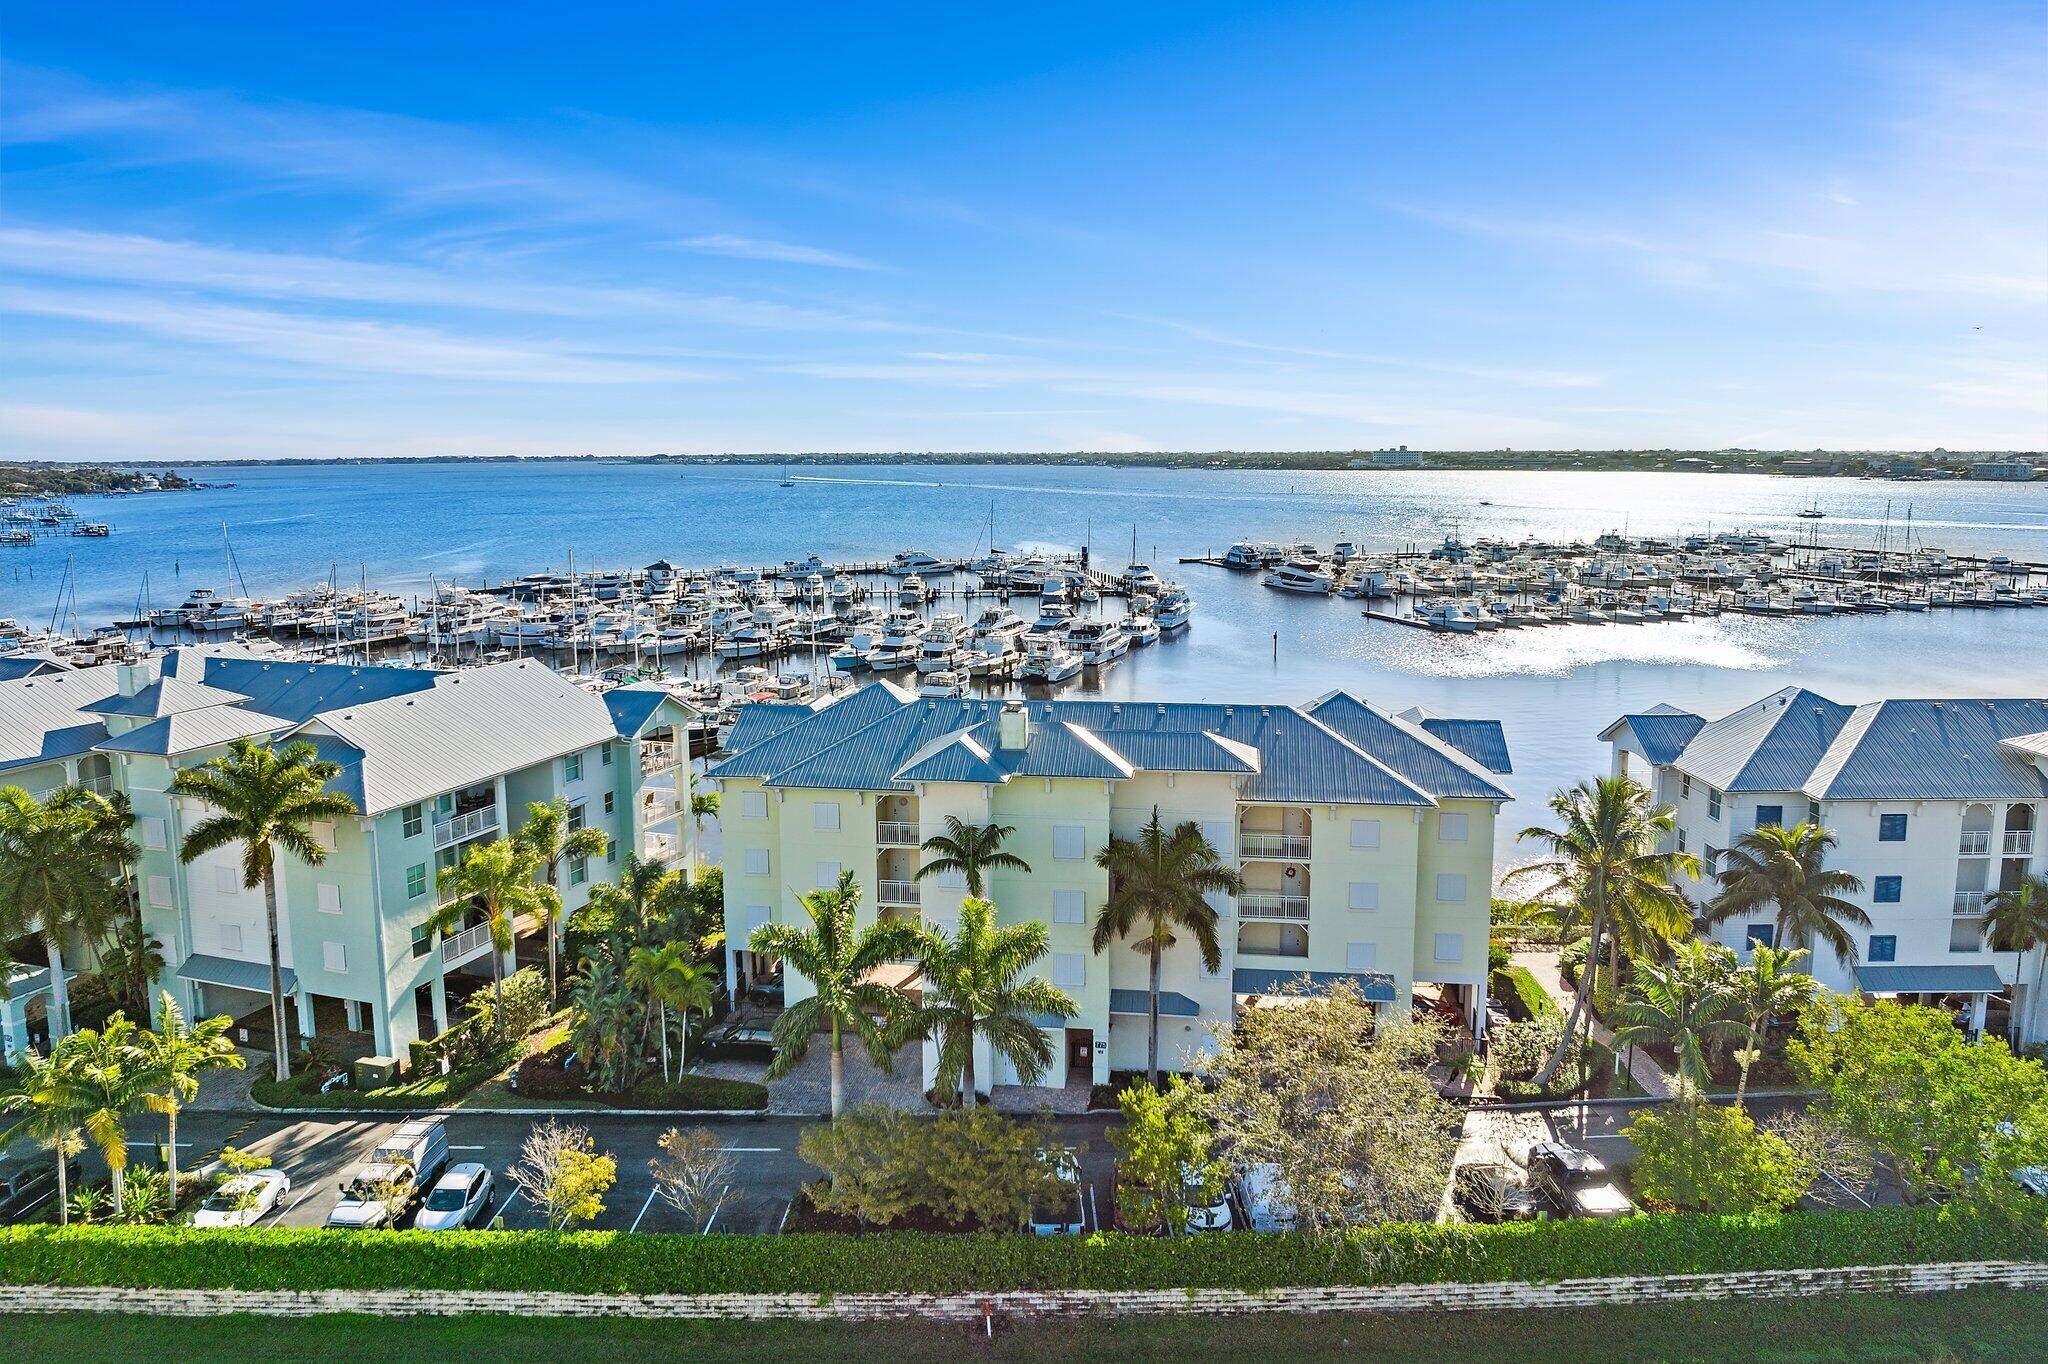 Highly sought after 3 bedroom, 2 bath condo in the Yacht Club with wide water views of the St Lucie River.